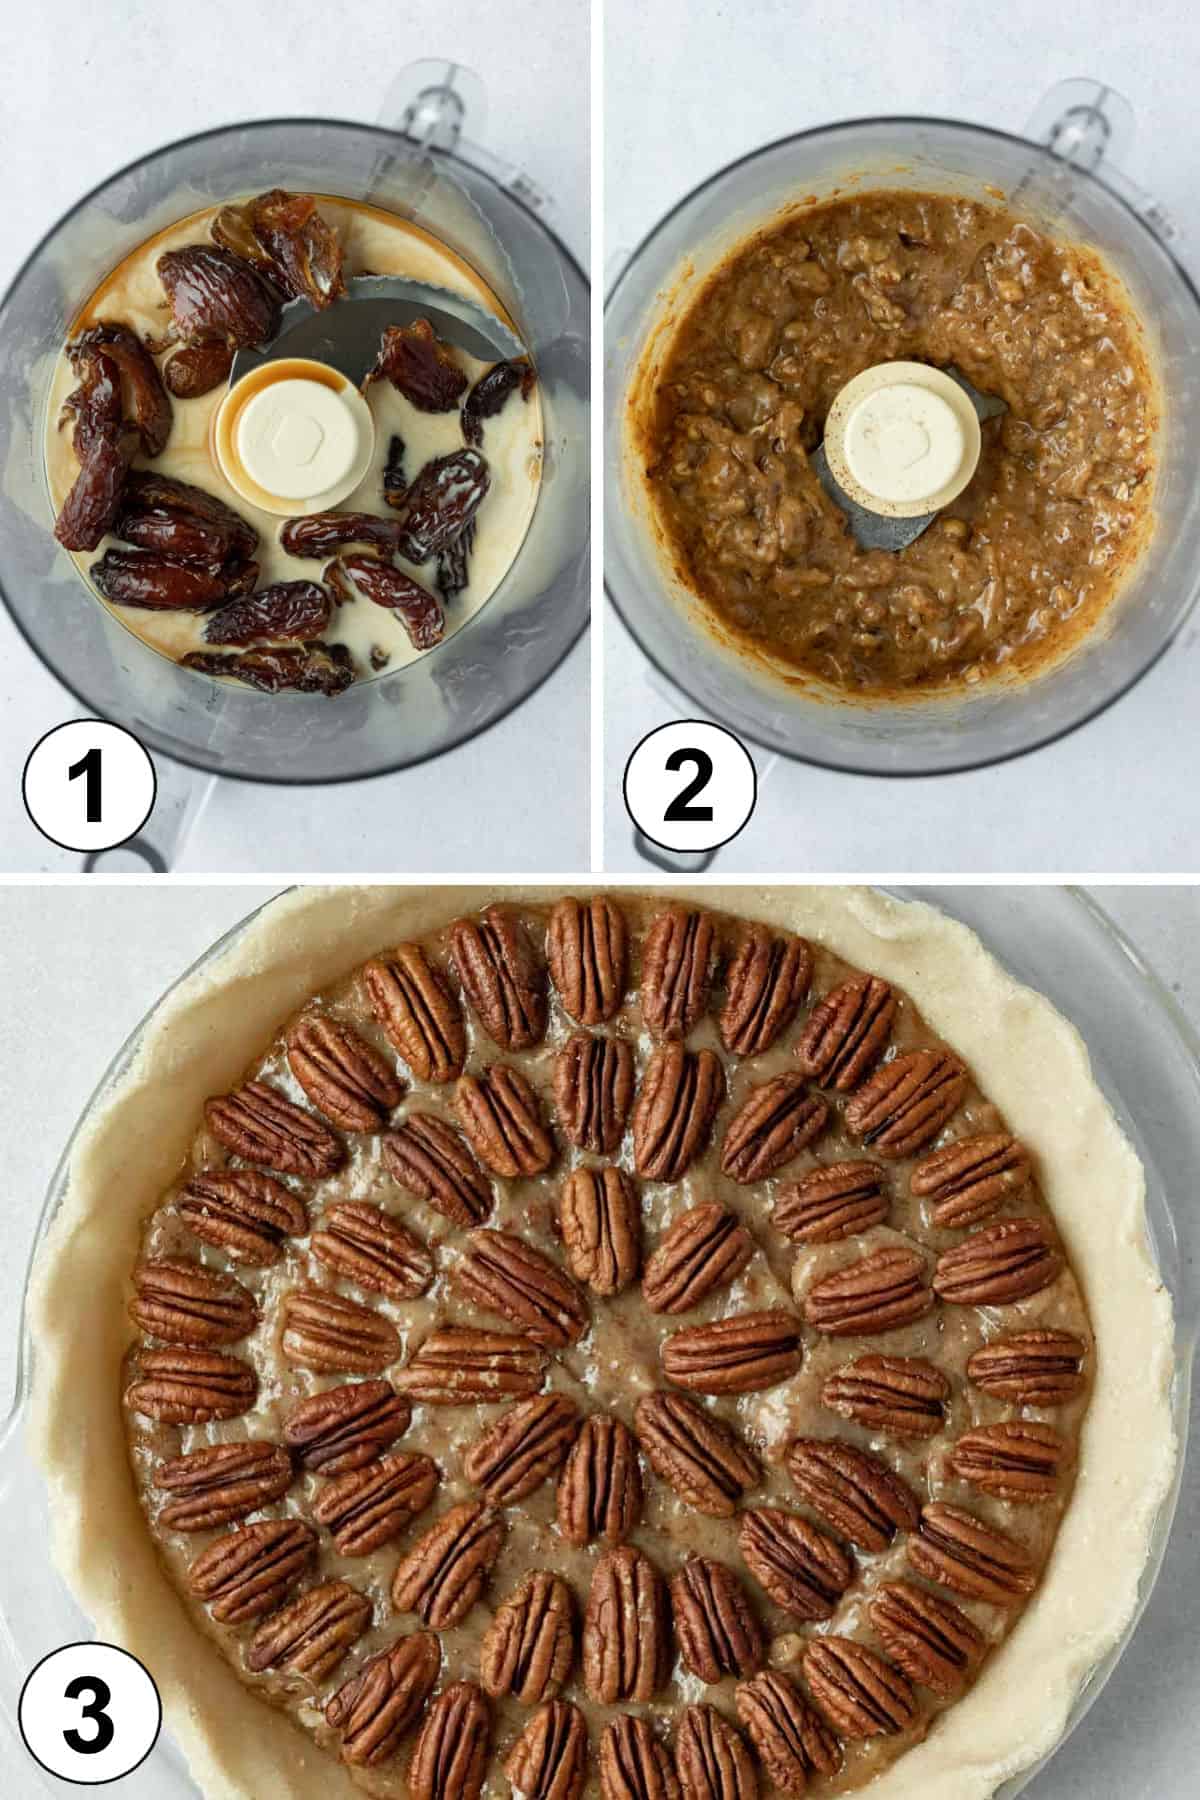 a 3-photo collage showing the steps involved in making and assembling the pie.